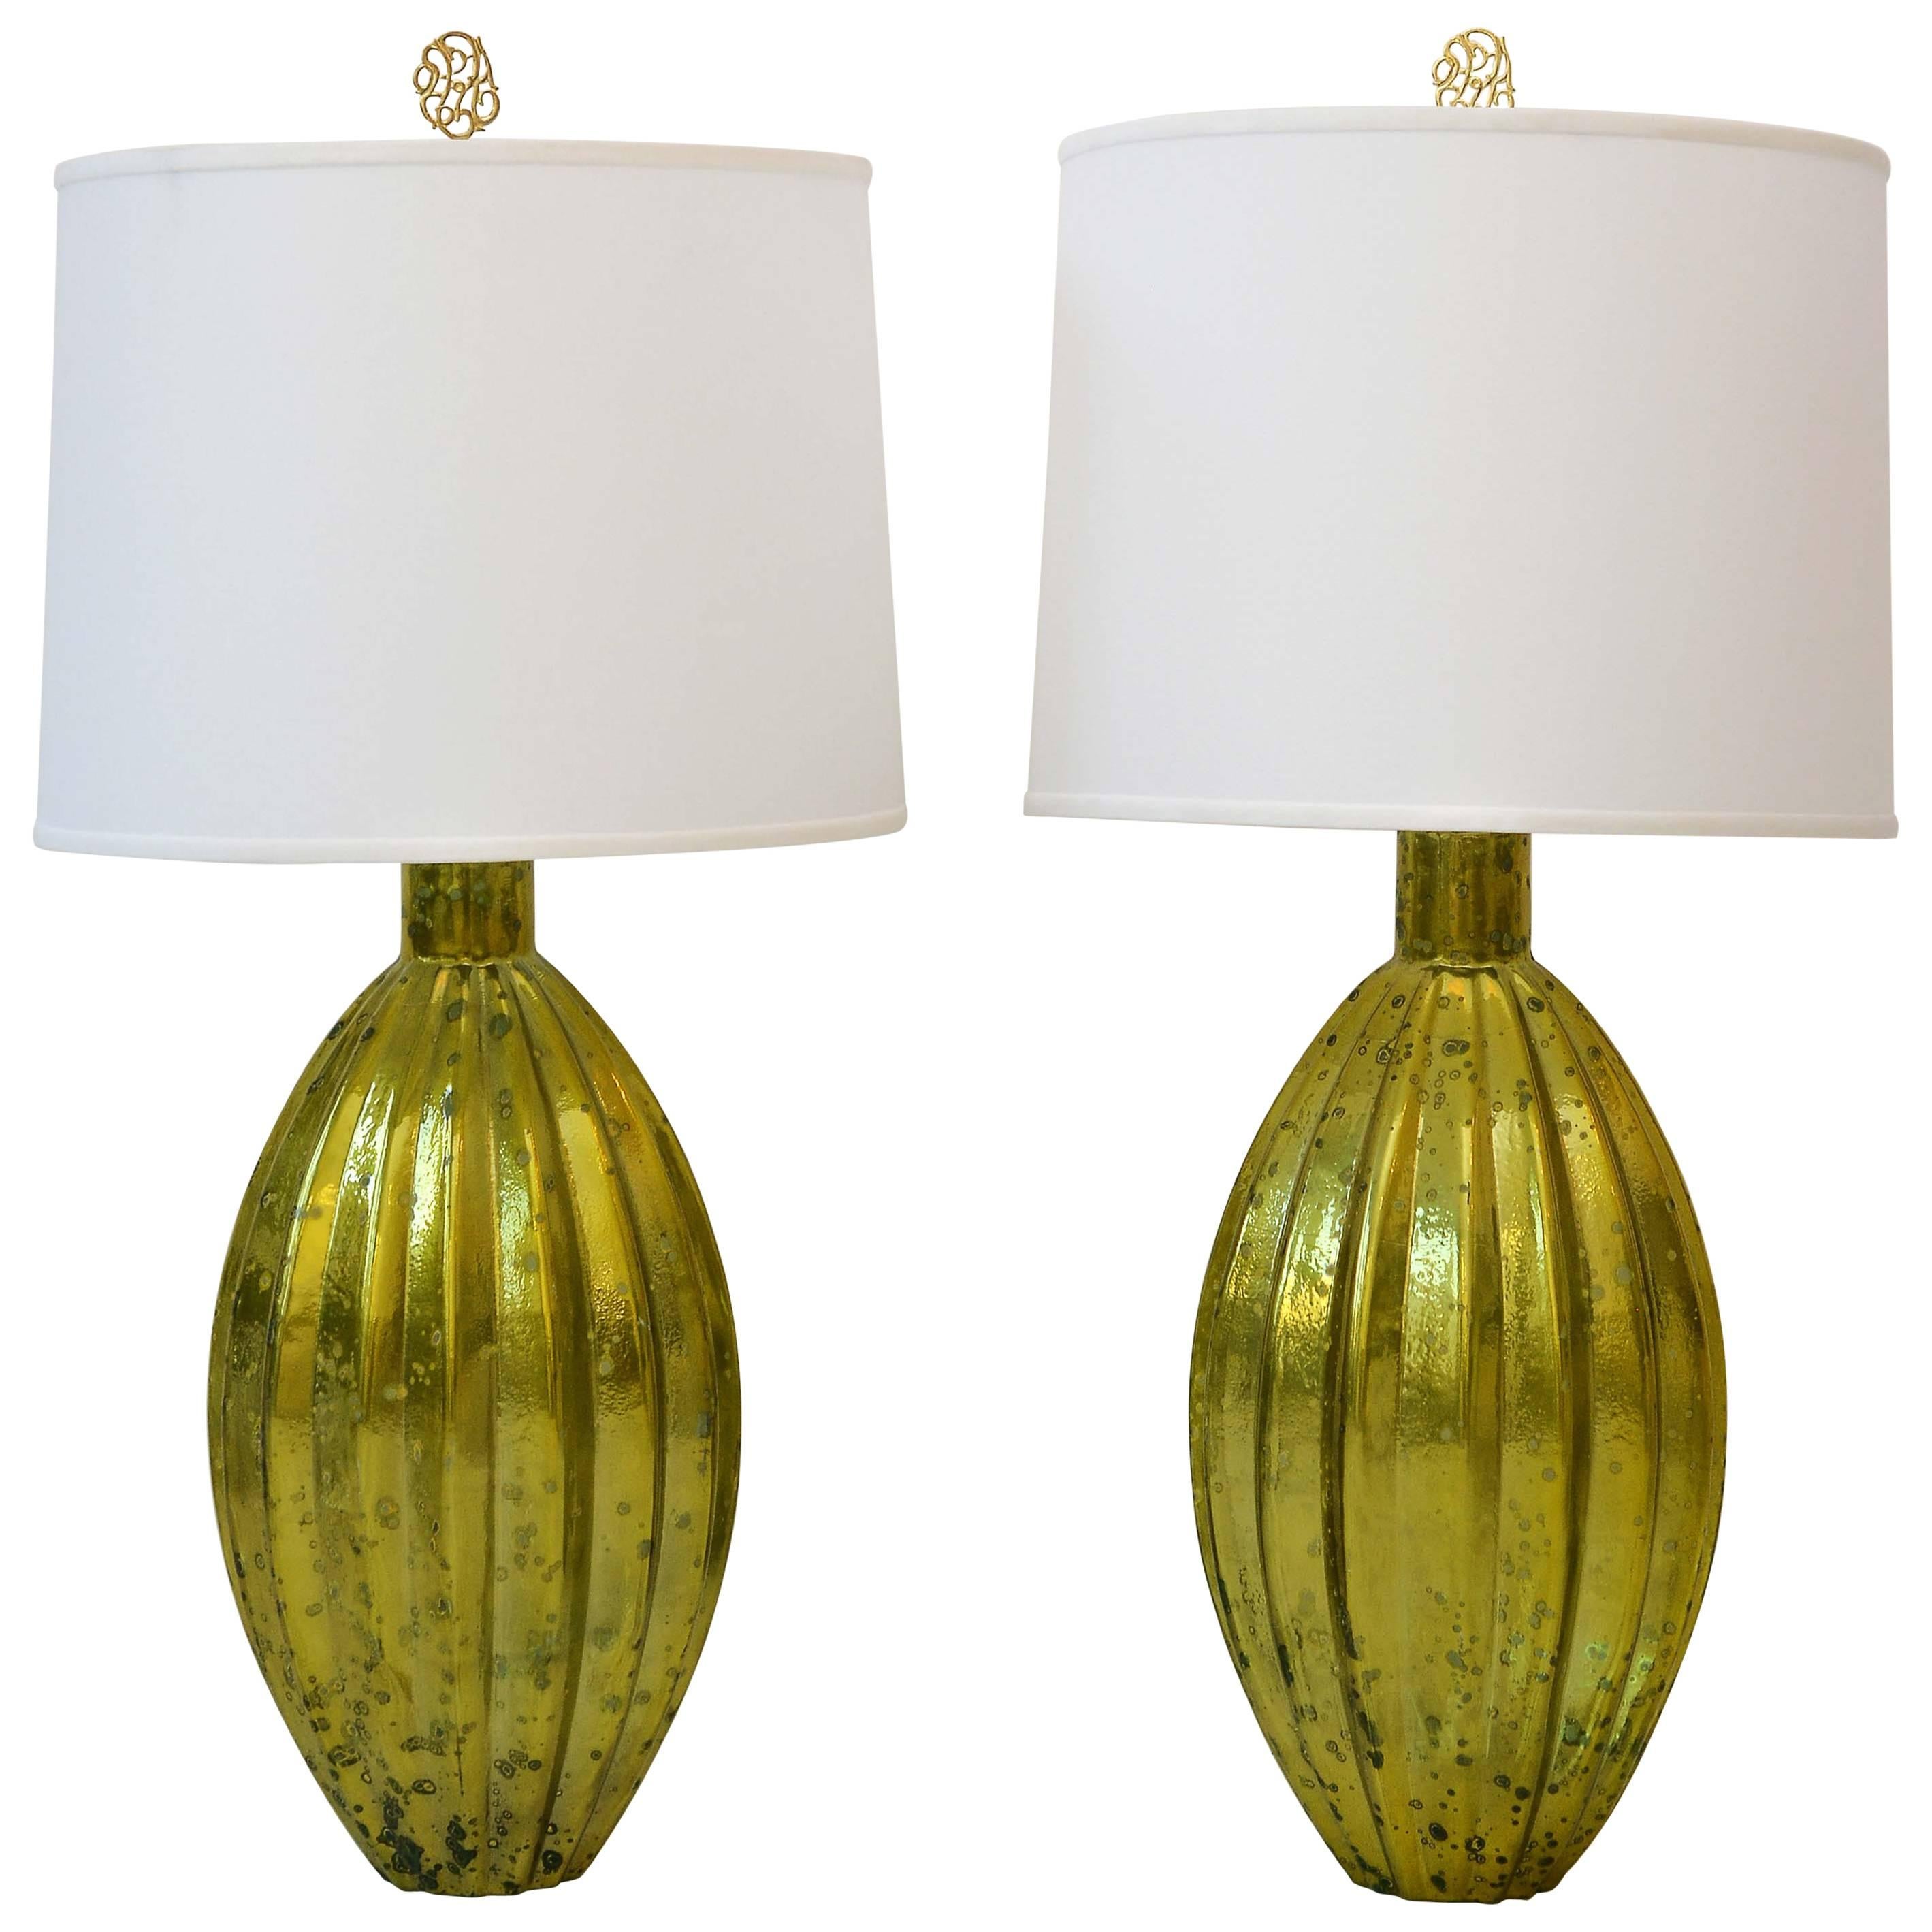 Pair of Vintage Golden Glass Lamps